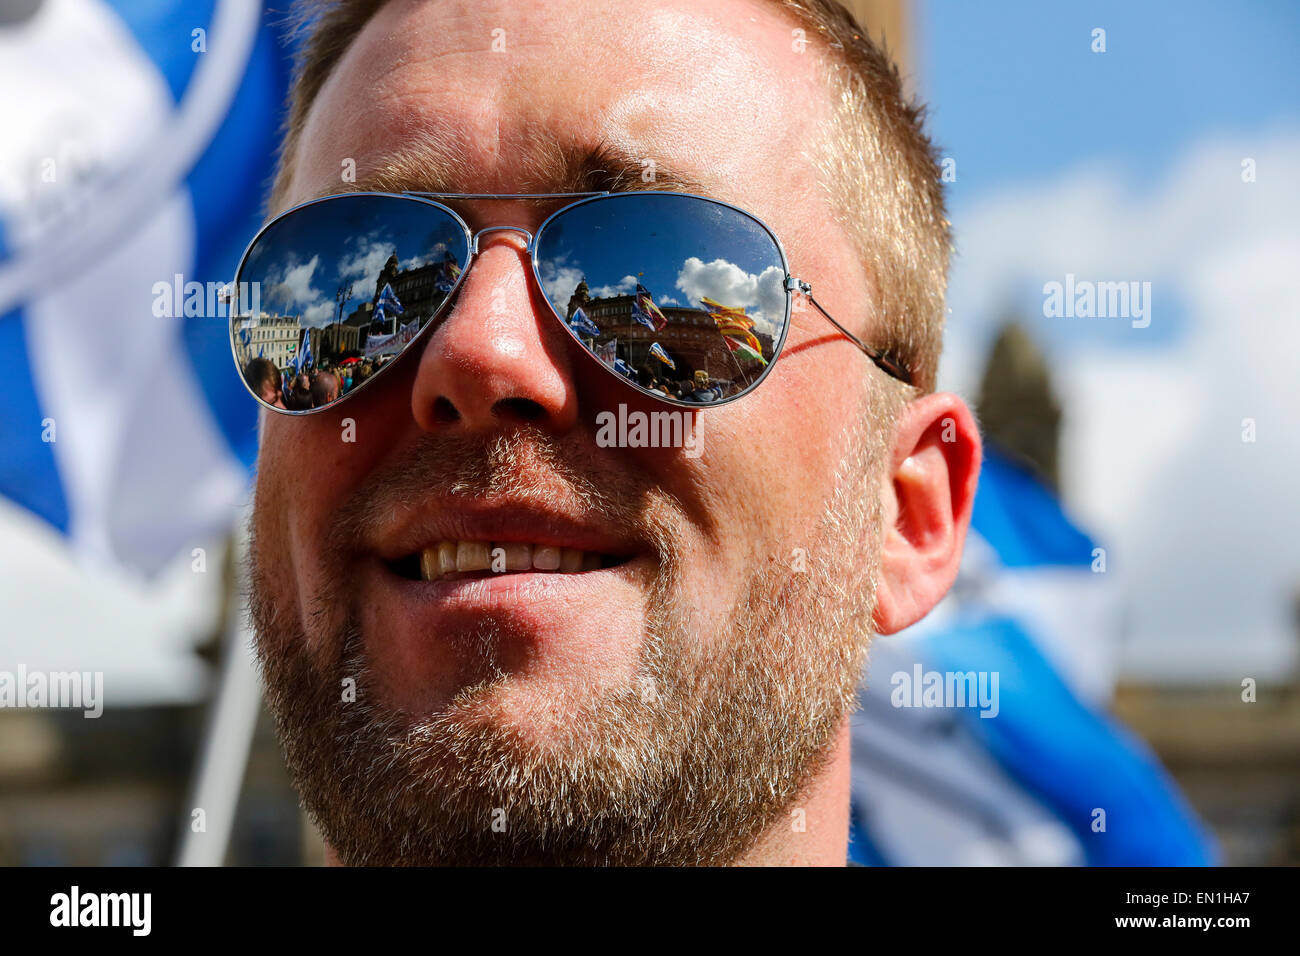 Man wearing reflective sunglasses attending an Independence and Political rally in George Square, Glasgow, Scotland, UK Stock Photo